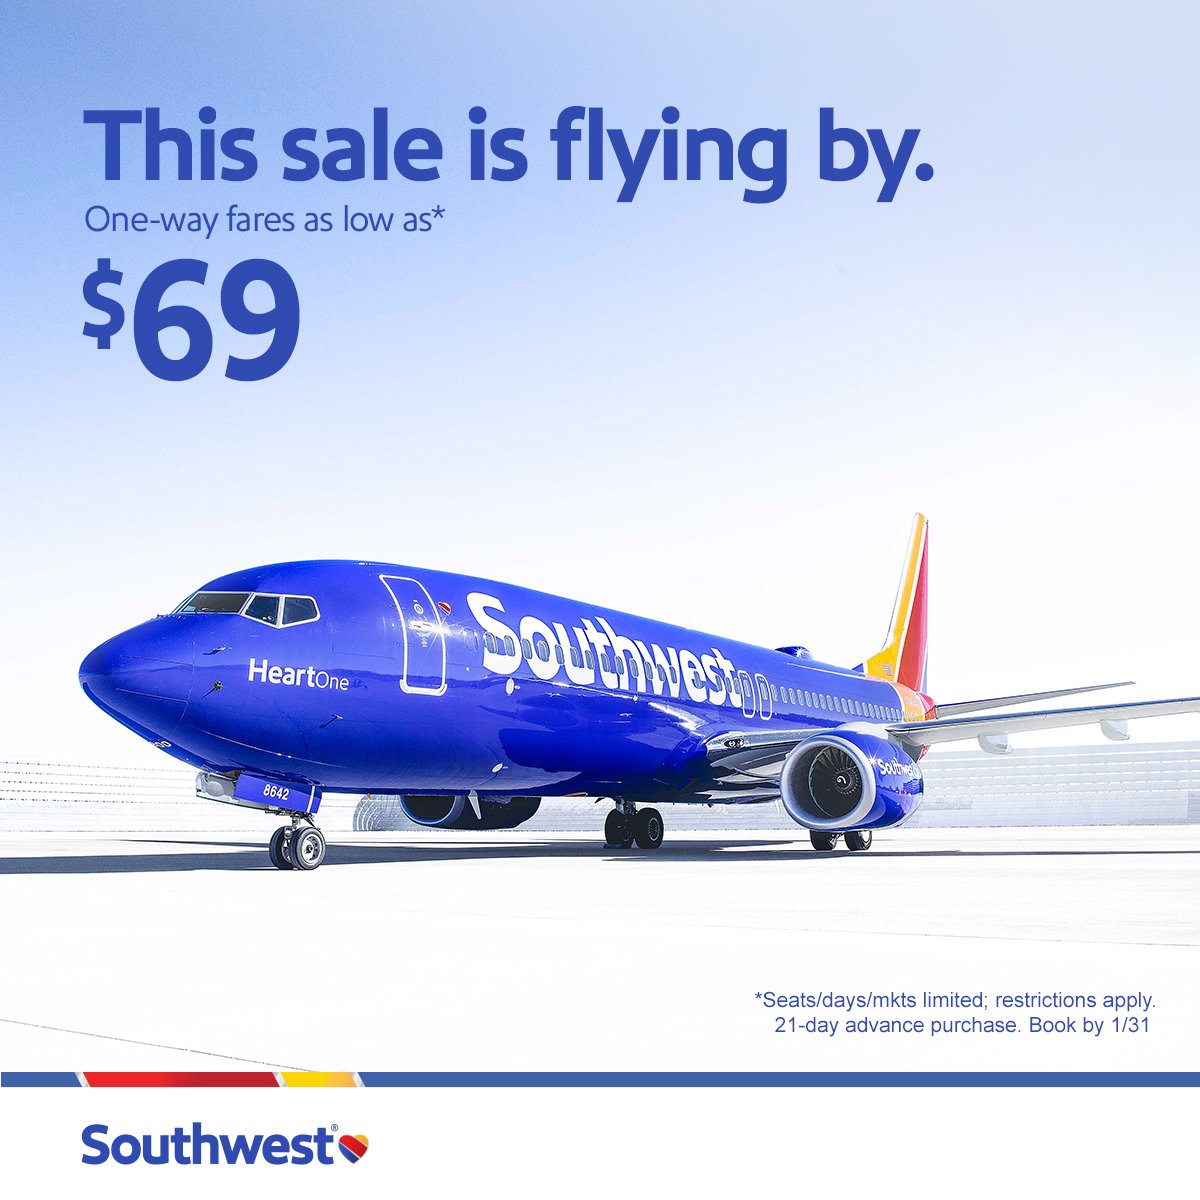 Southwest Airlines Offers Unbeatable Sale on Tickets Starting at $69